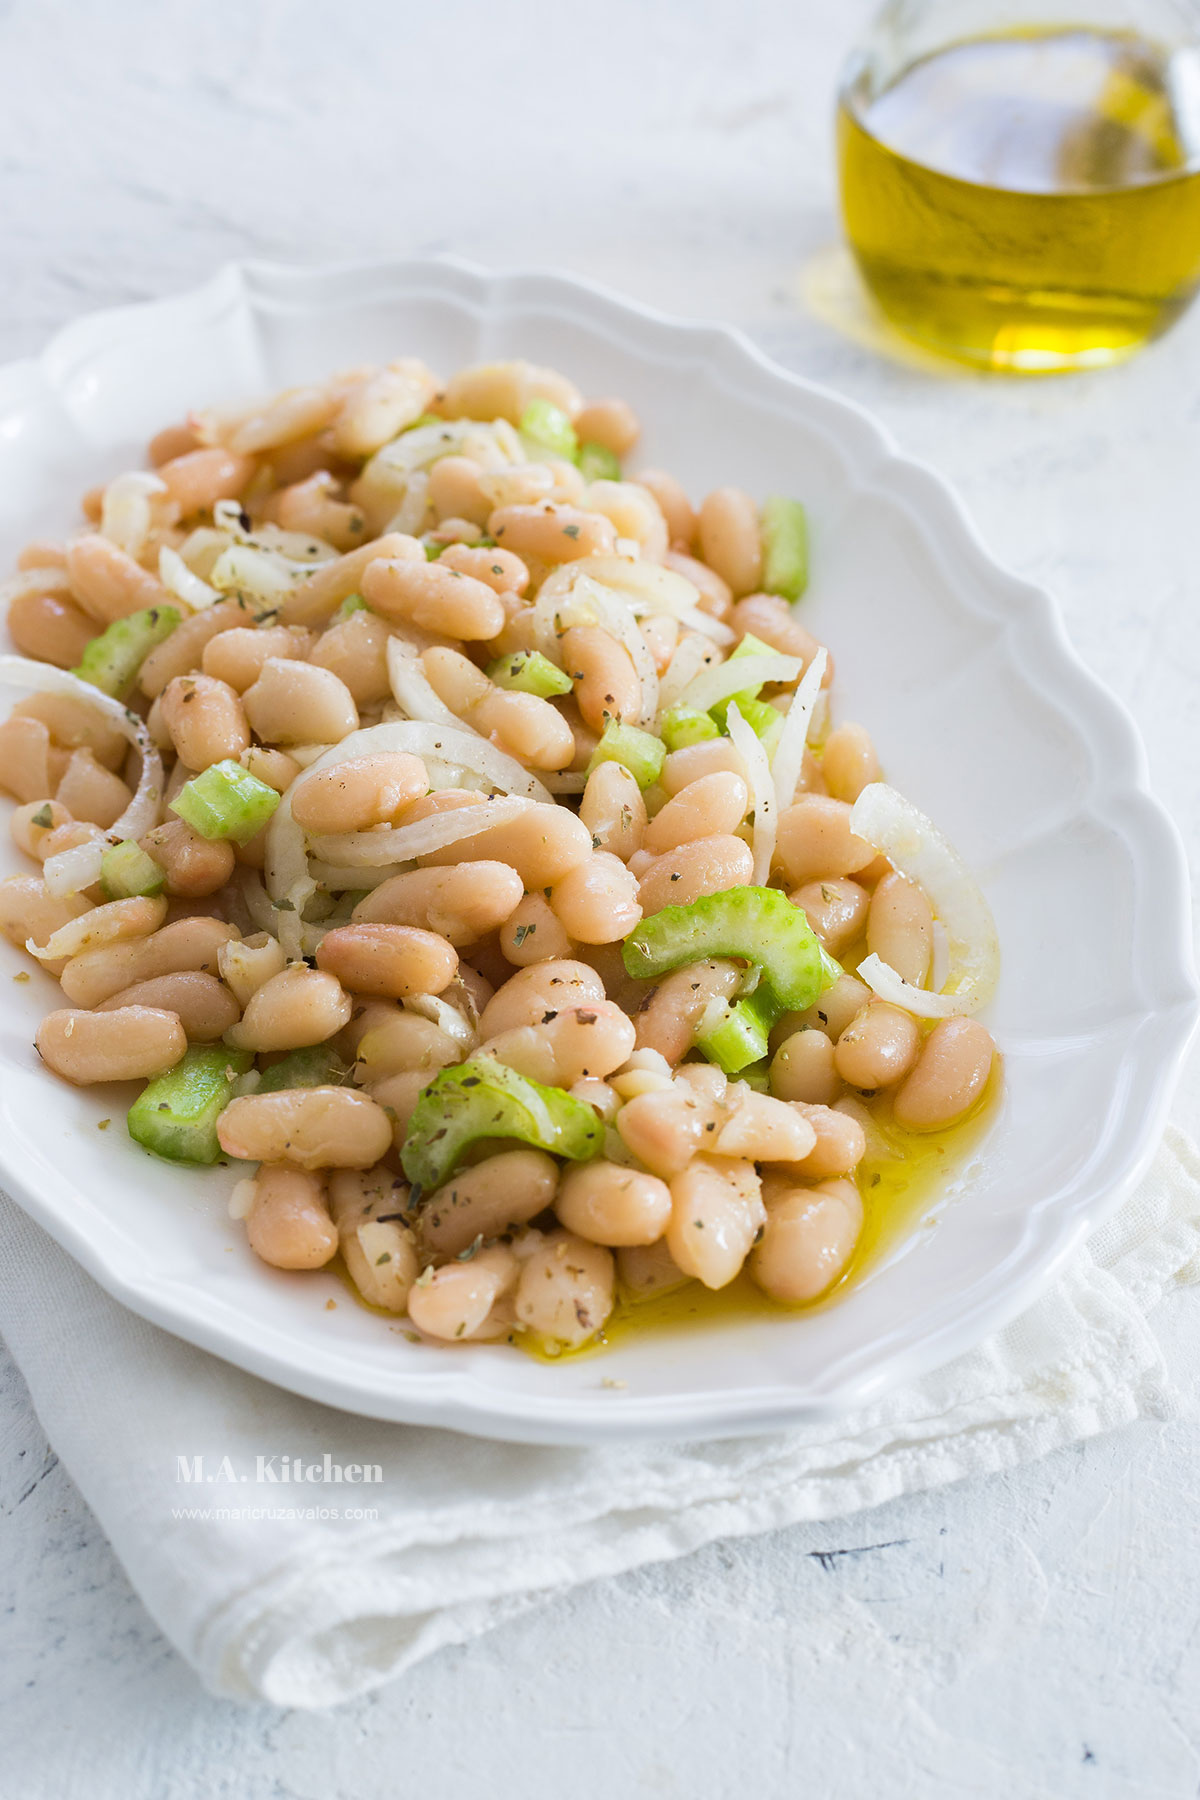 Authentic Italian cannellini beans salad served in a white plate.